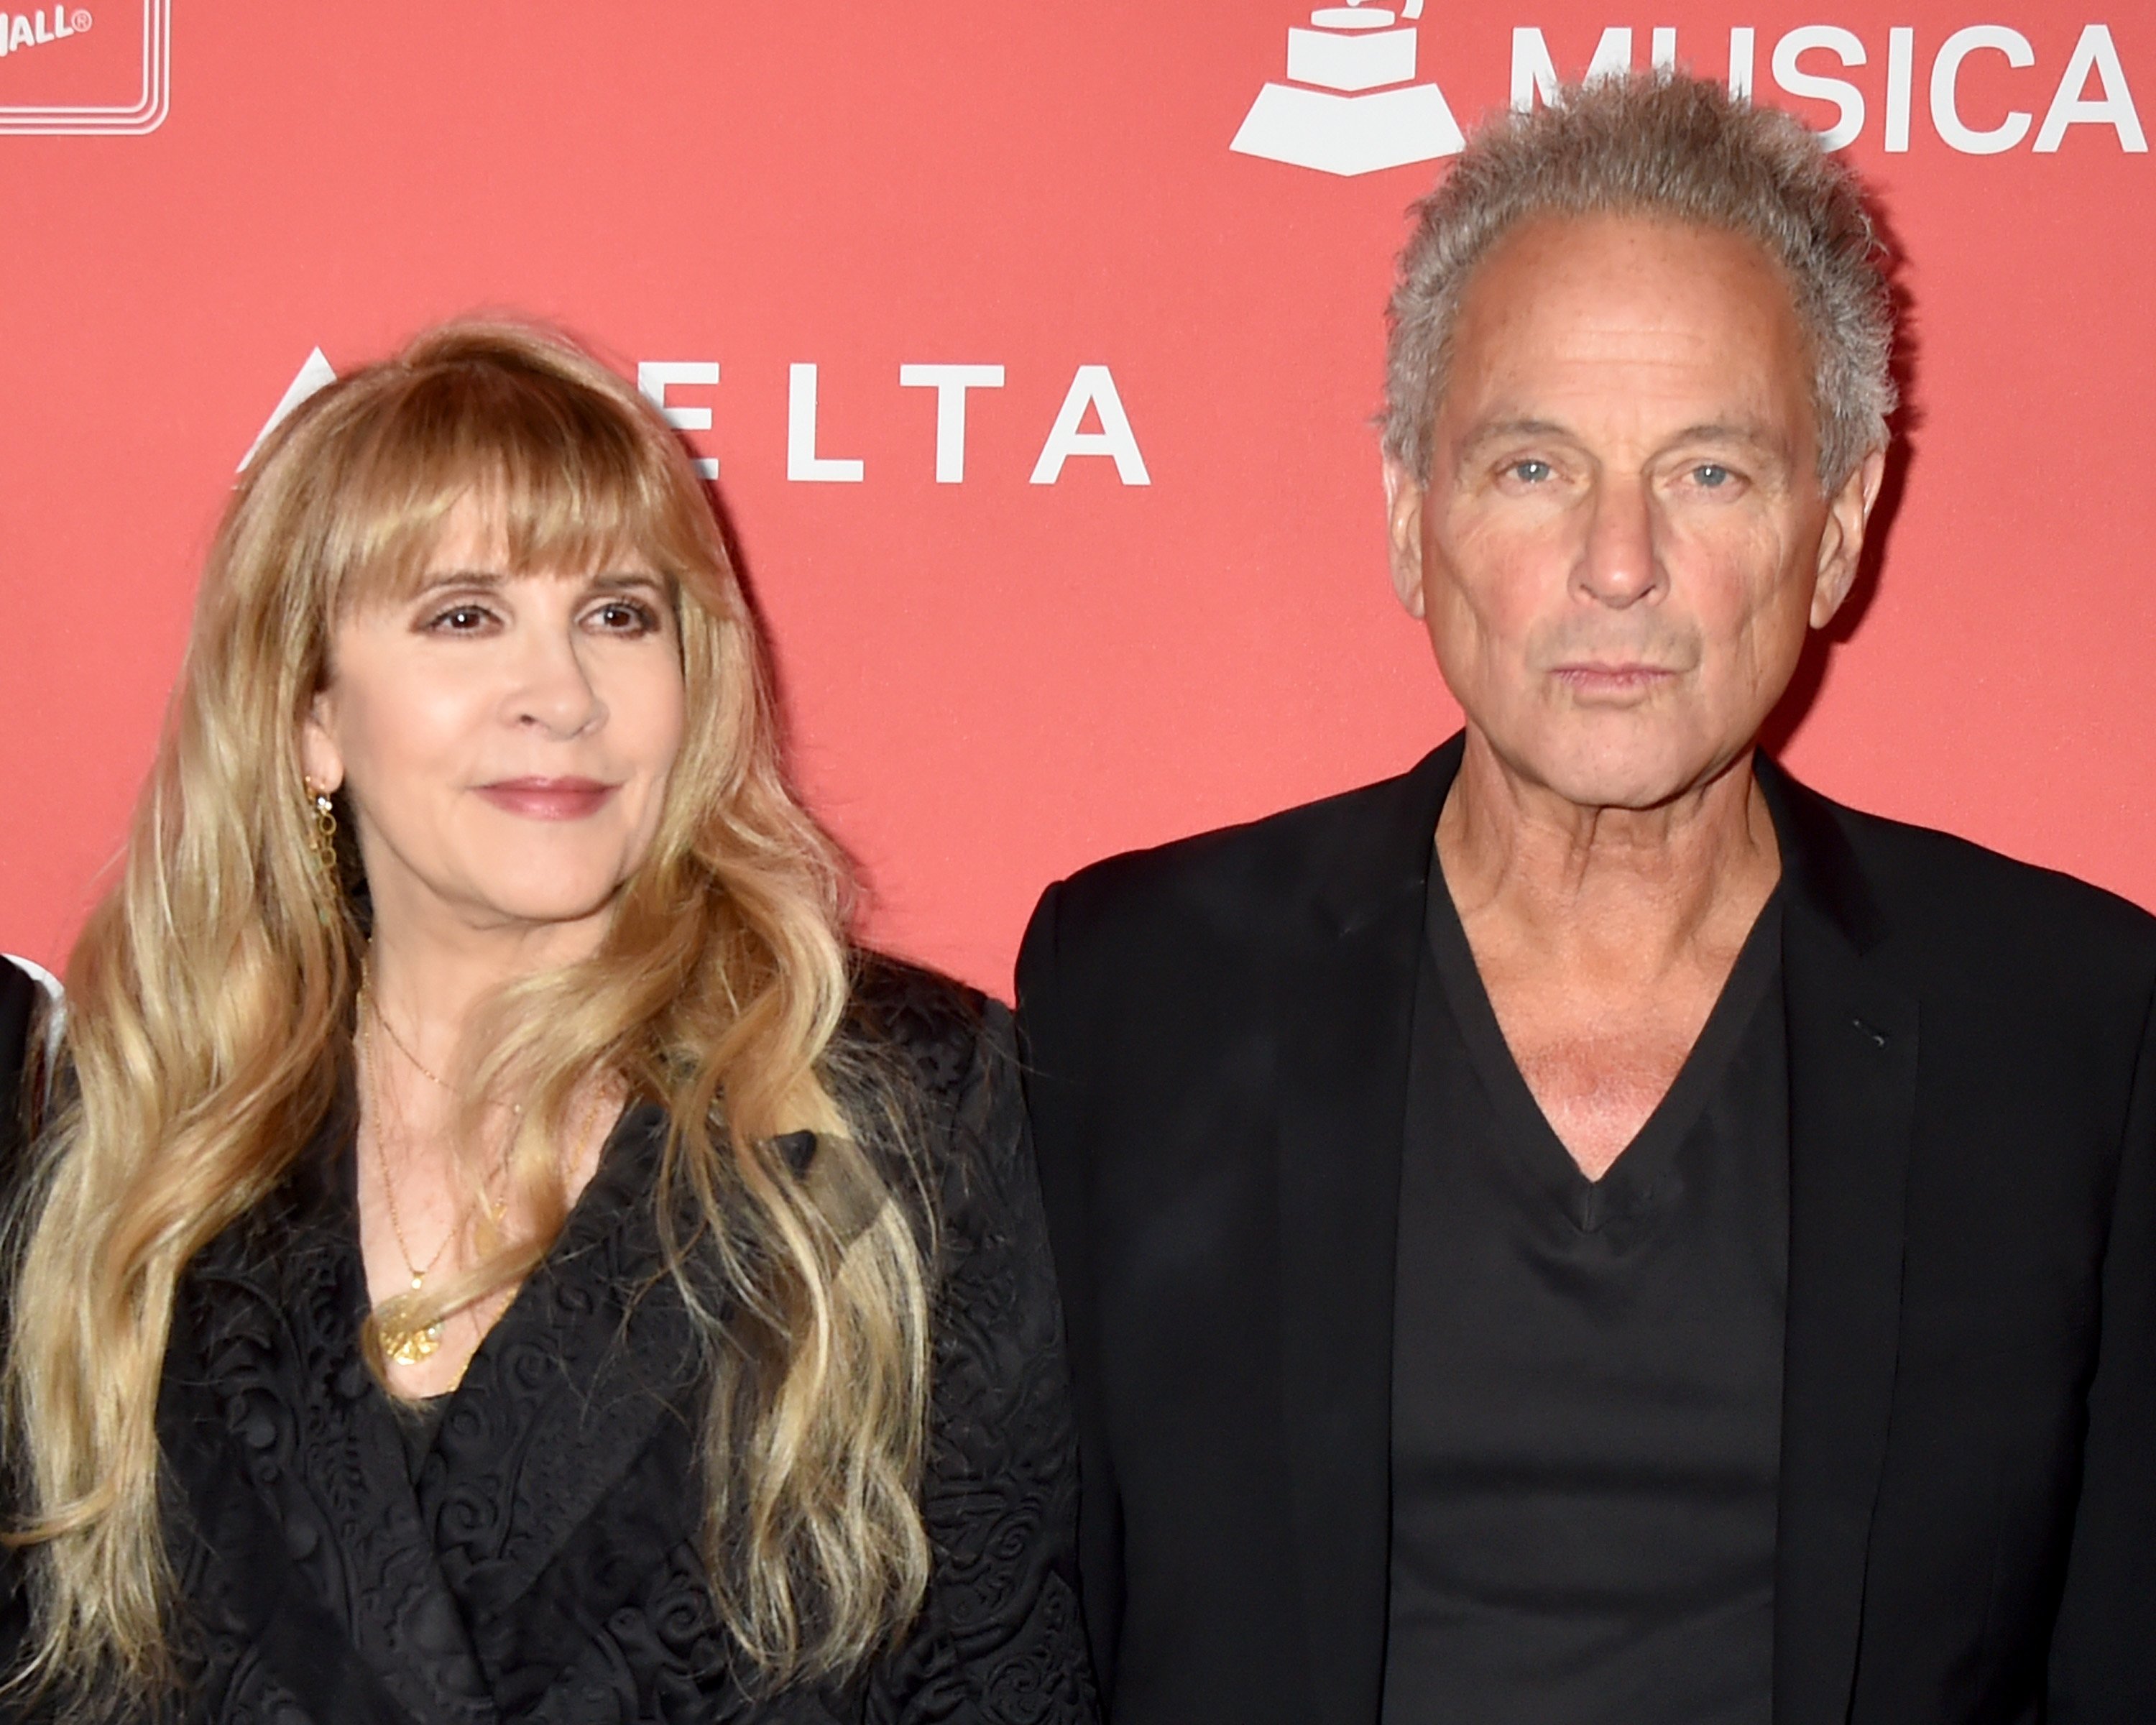 Honorees Stevie Nicks and Lindsey Buckingham attend MusiCares Person of the Year honoring Fleetwood Mac